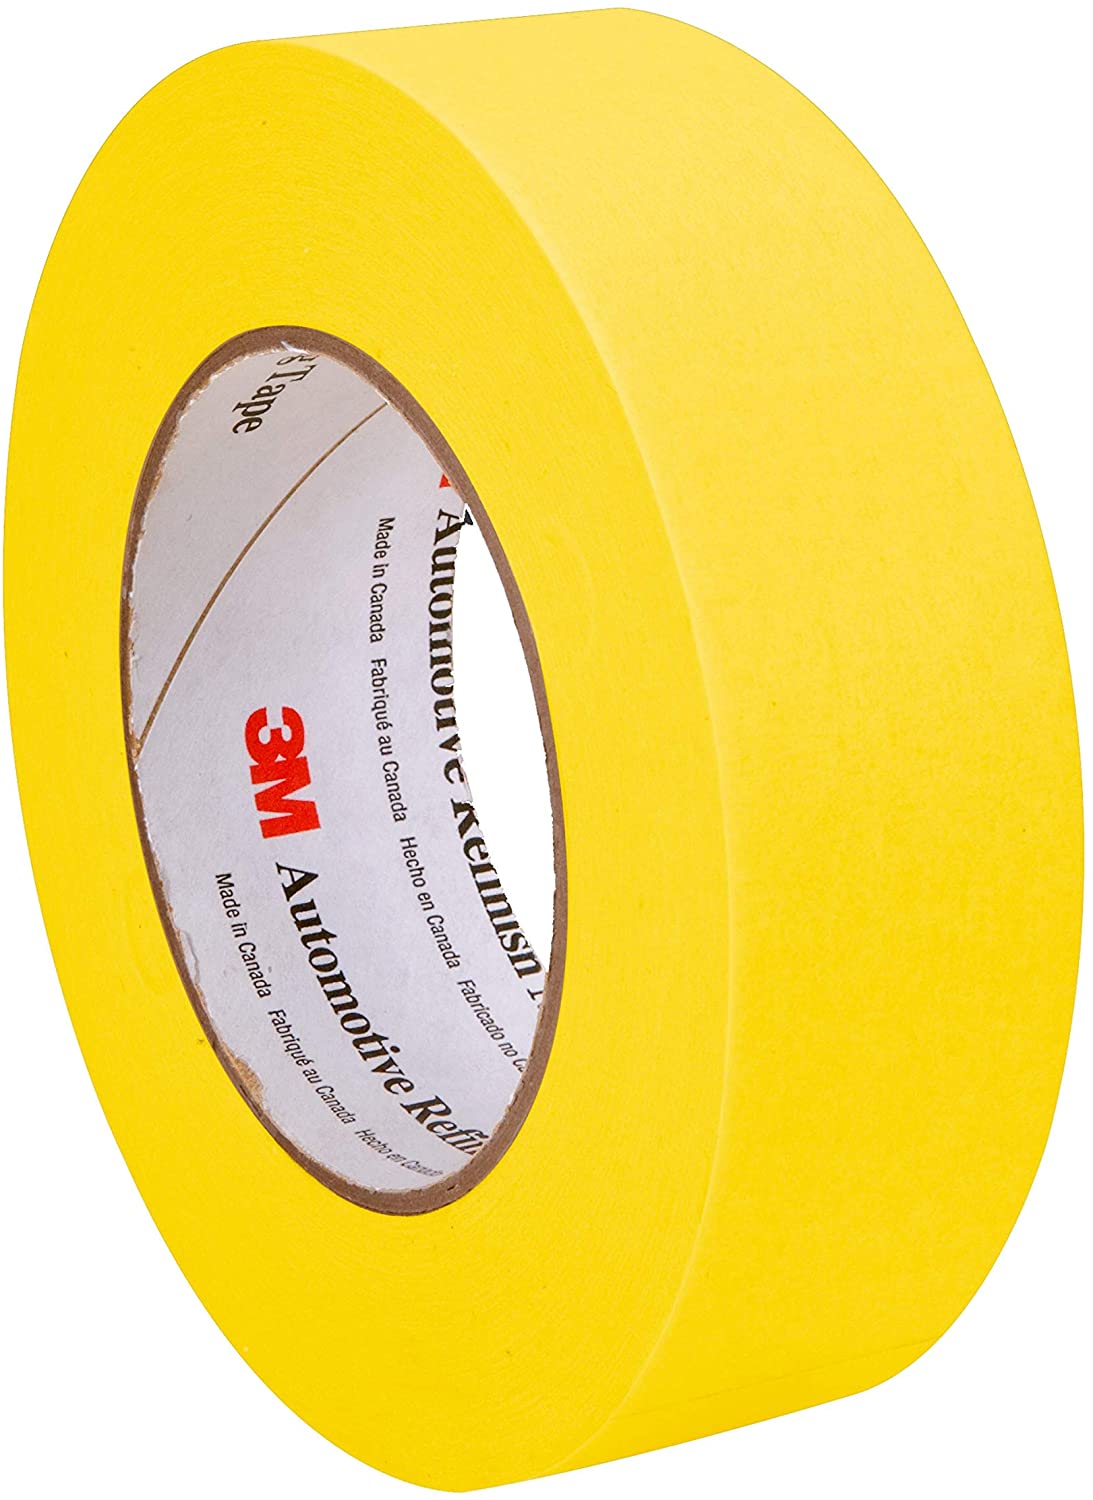 Buy 3M Adhesive 1 inch White Masking Tape online at best rates in